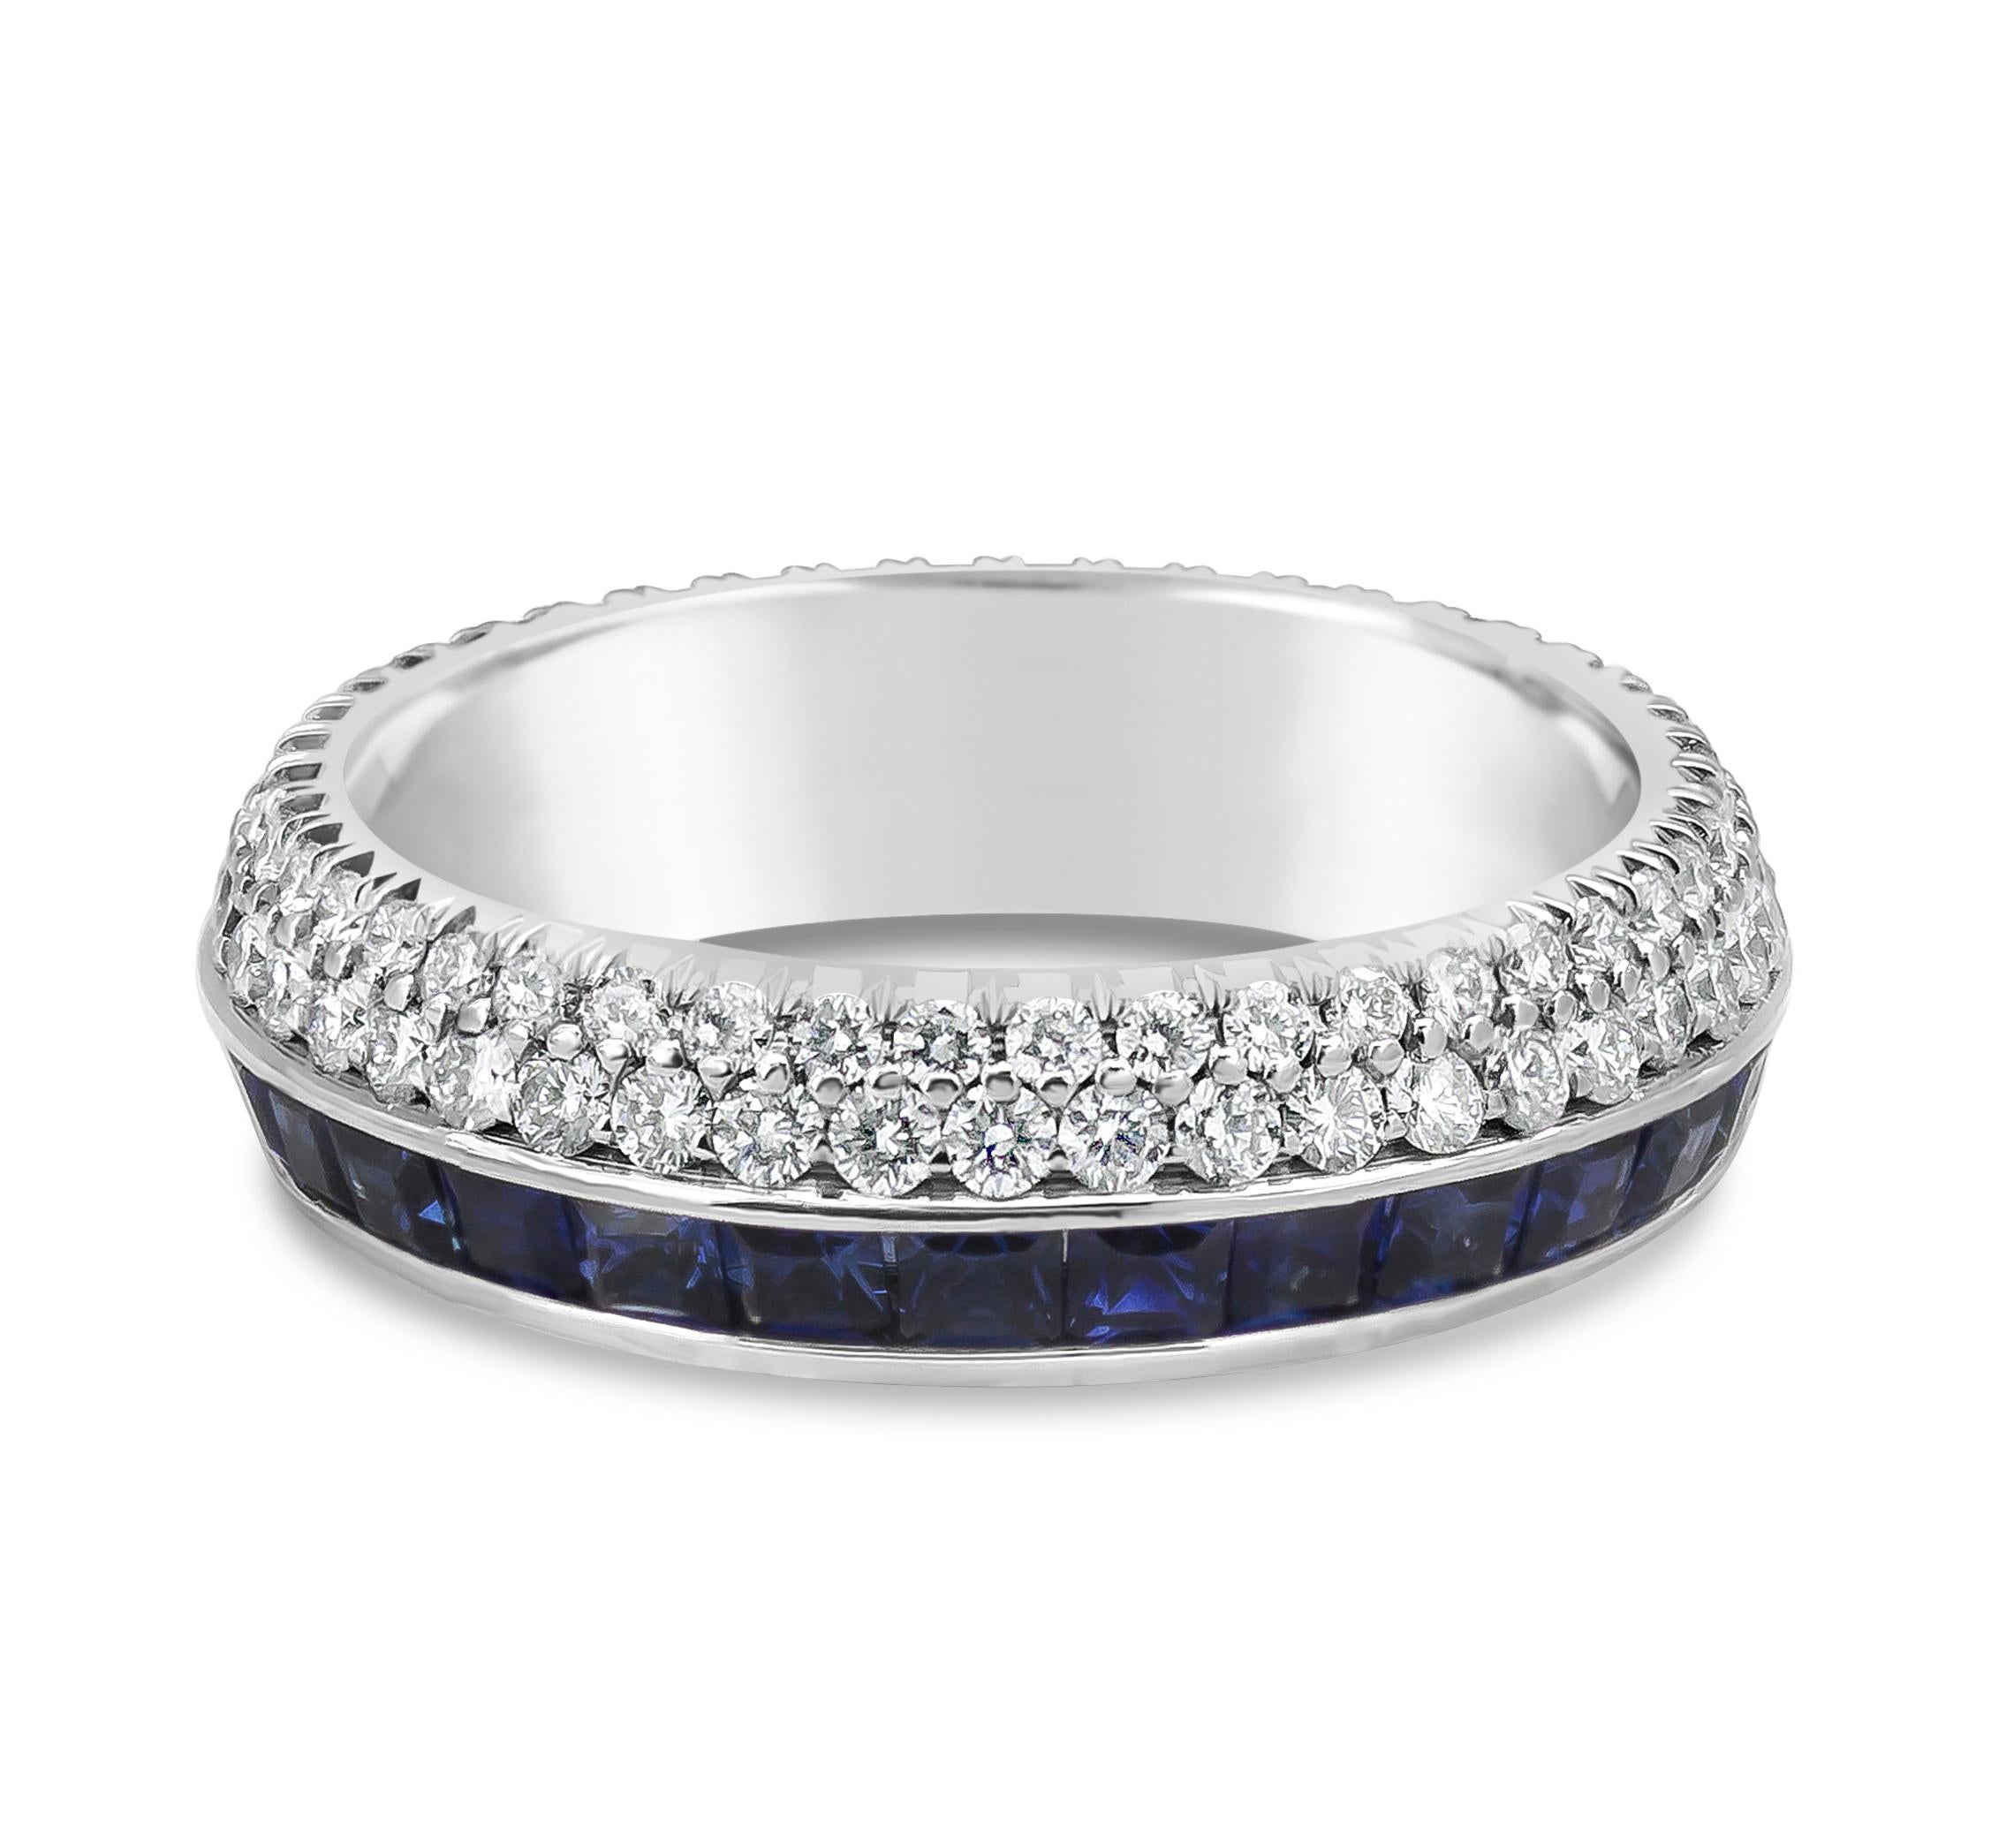 A modern and chic wedding band style showcasing a row of color-rich blue sapphires weighing 2.49 carats total, and round brilliant diamonds weighing 1.10 carats total, in palladium. The ring is designed to be reversible. Size 6.5 US. 

Style